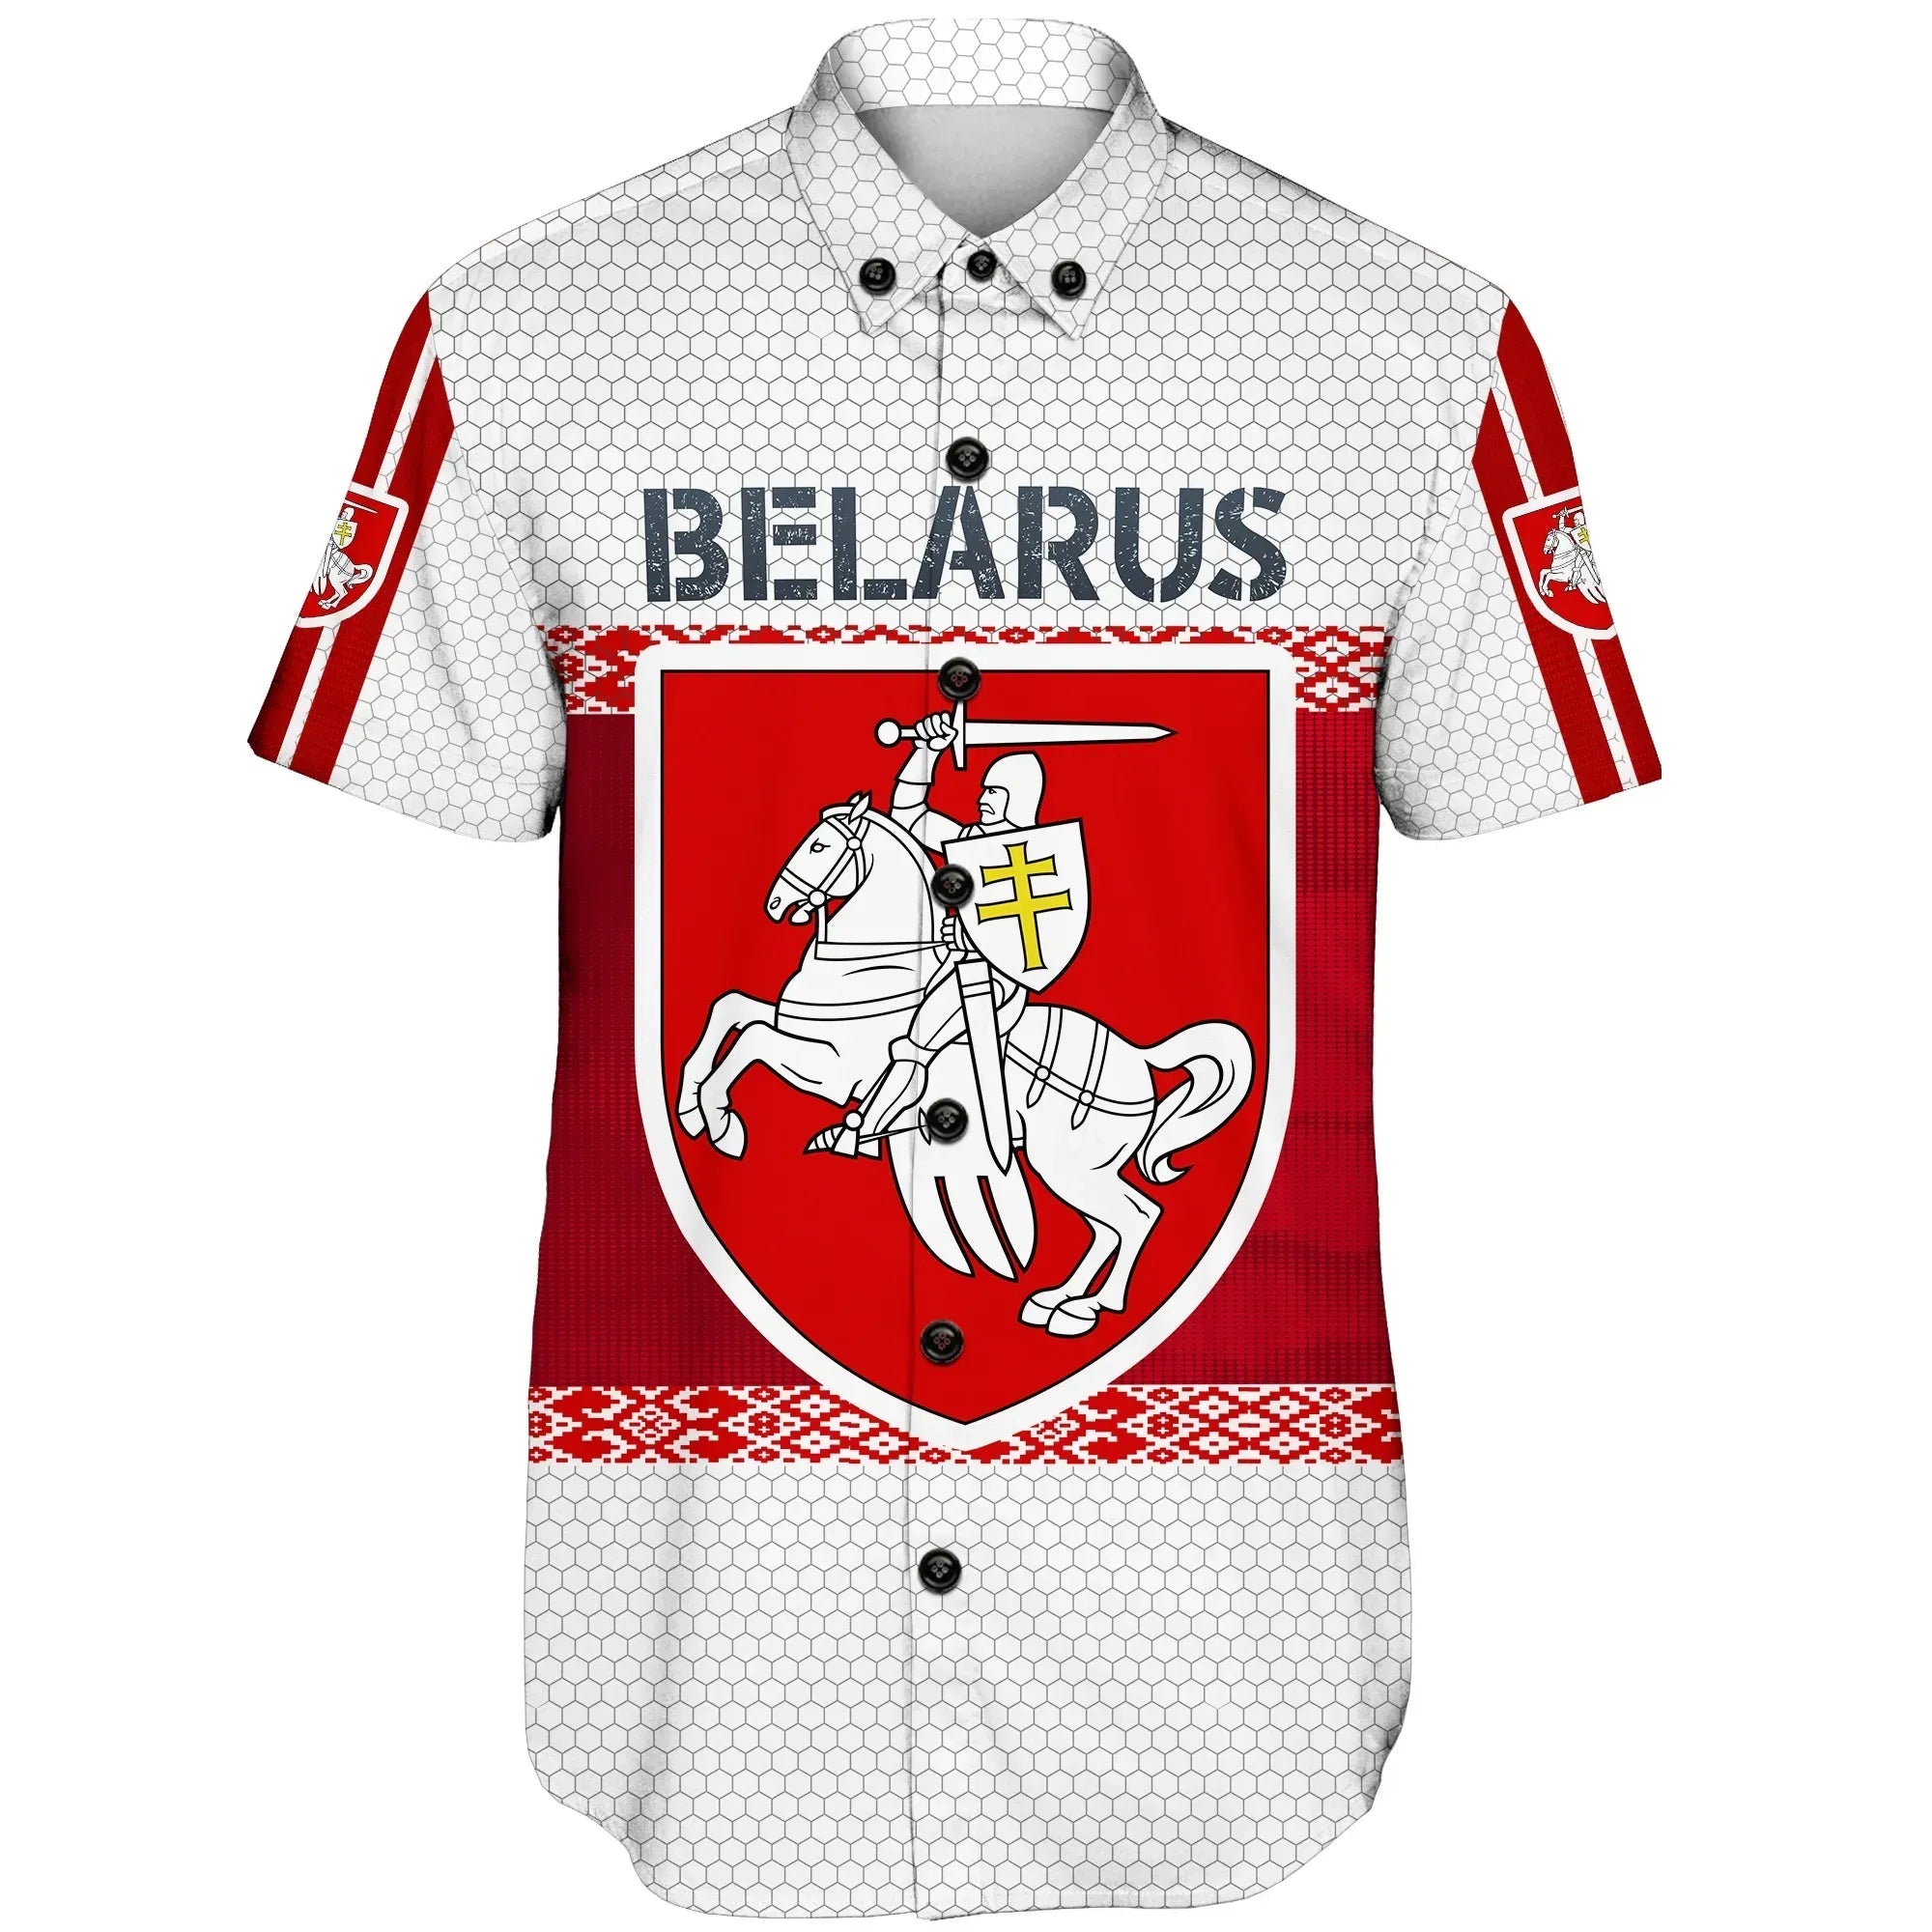 belarus-coat-of-arms-short-sleeve-shirt-special